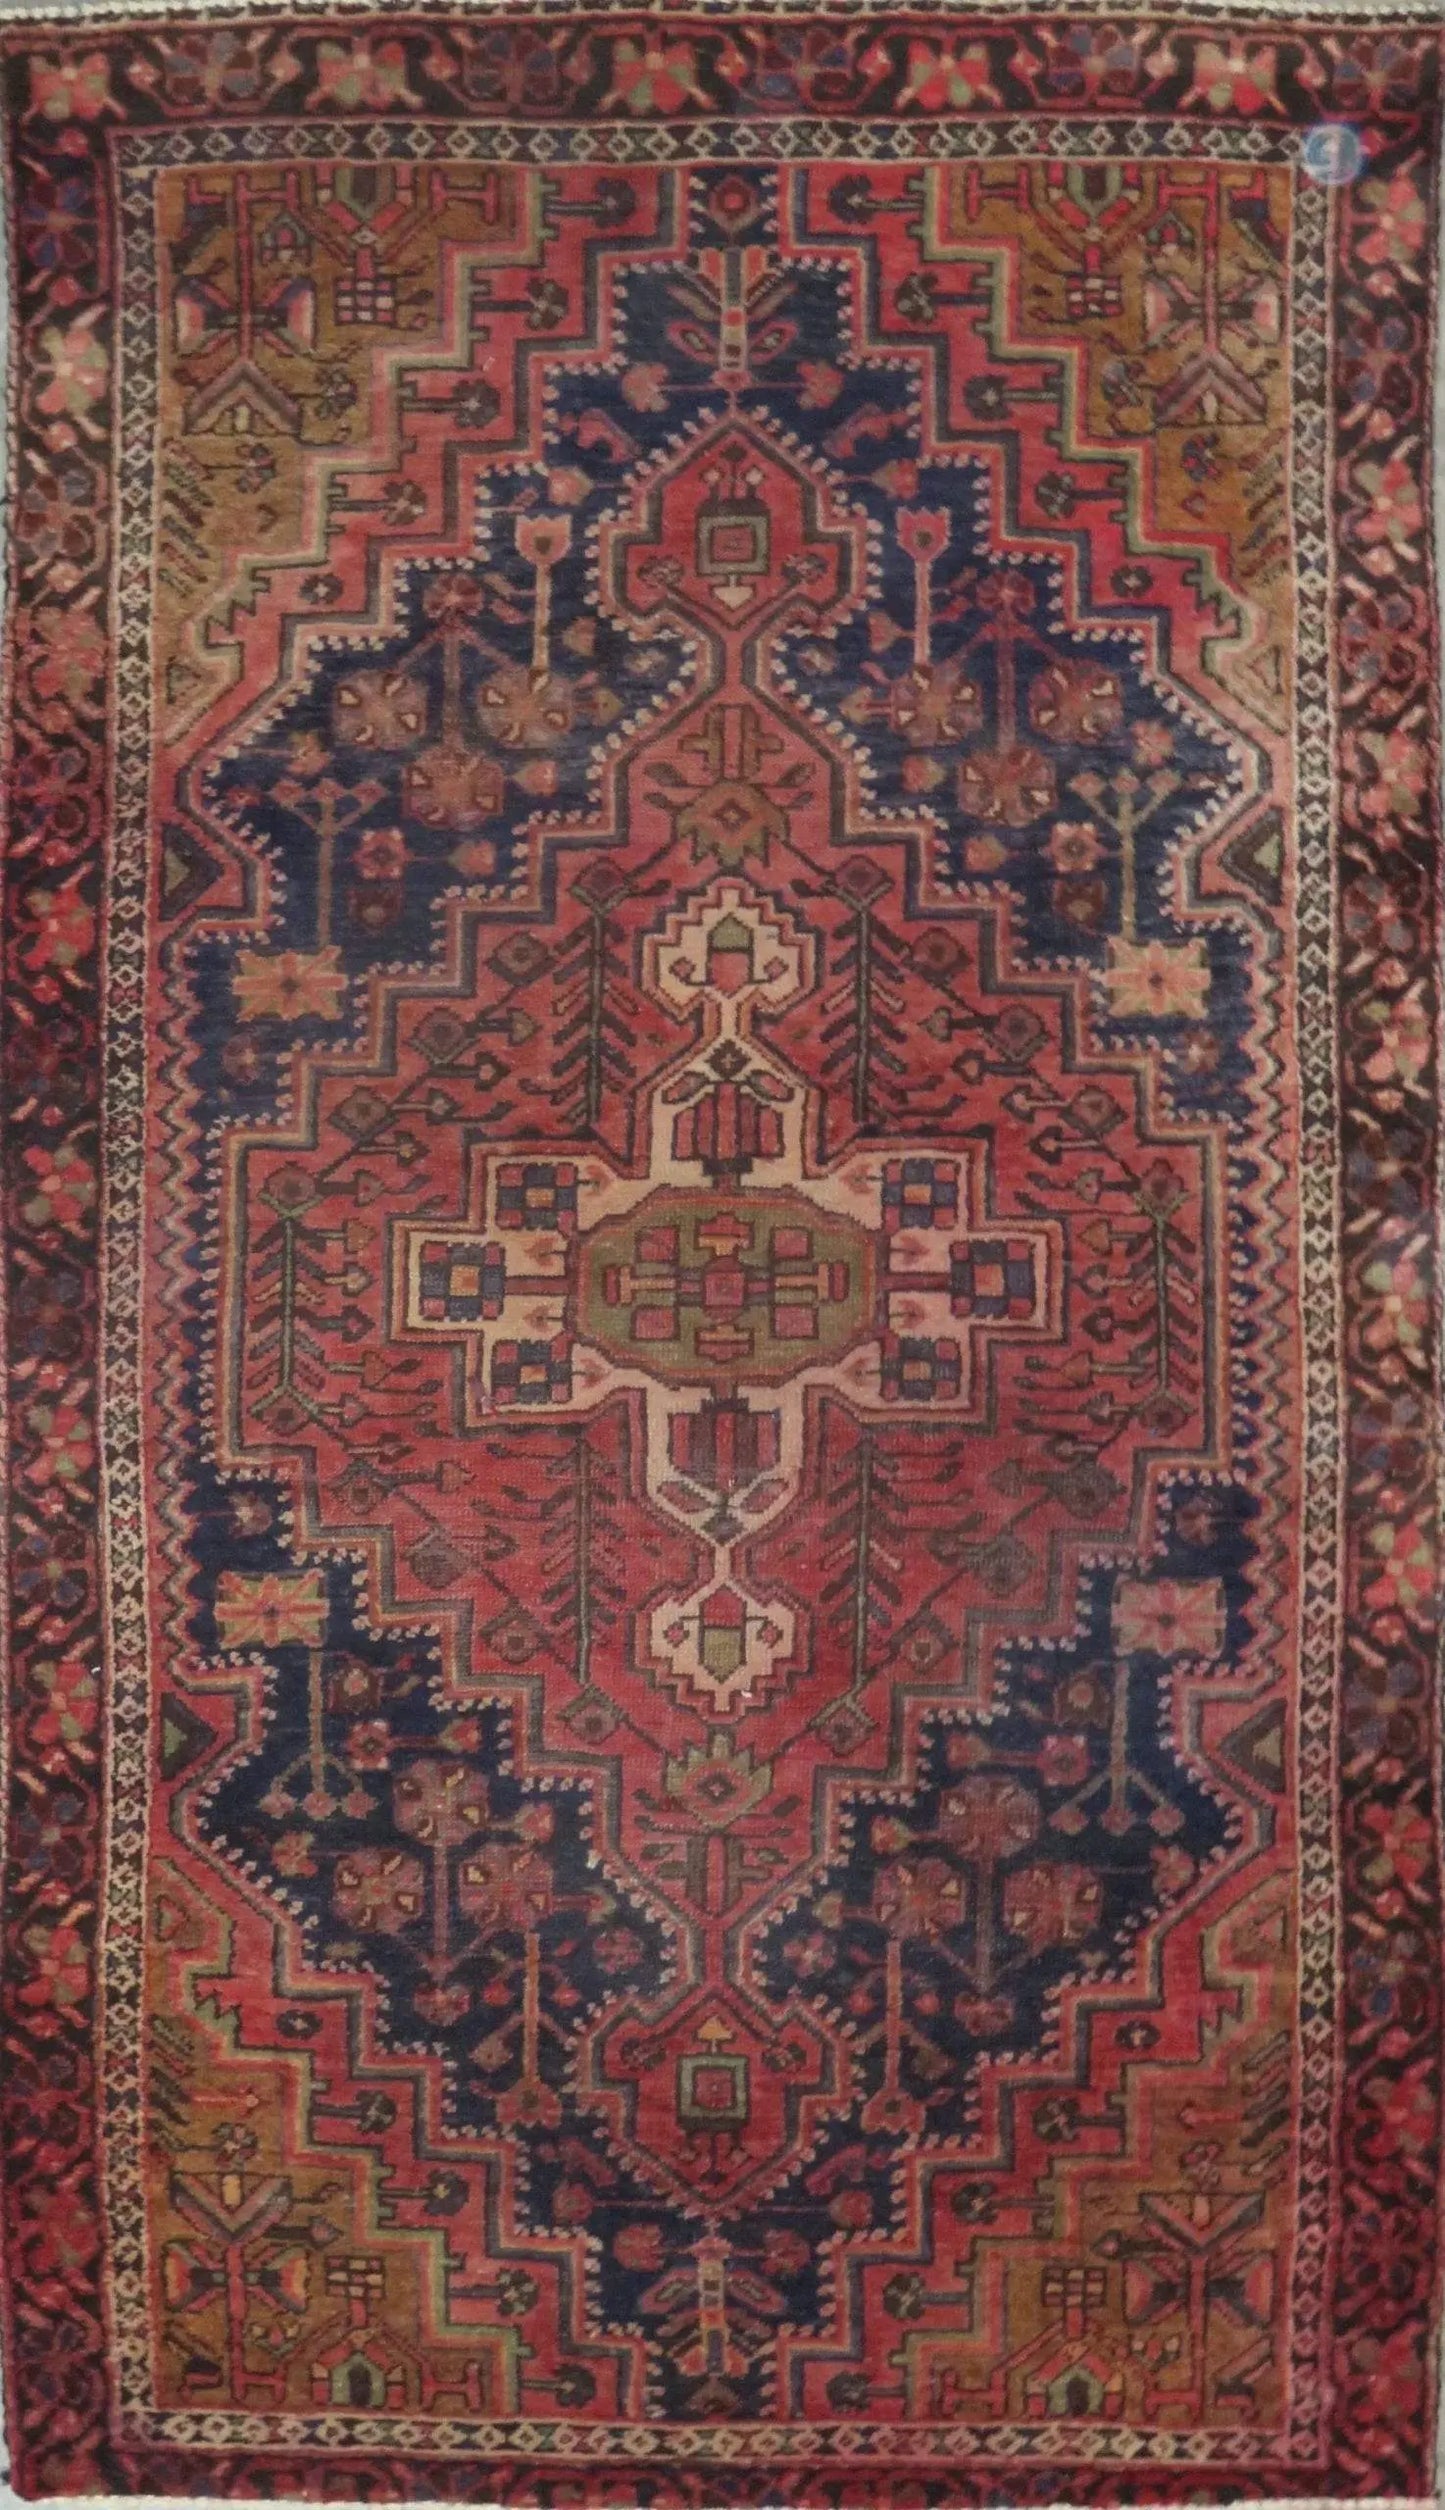 Hand-Knotted Persian Wool Rug _ Luxurious Vintage Design, 6'10" x 3'8", Artisan Crafted